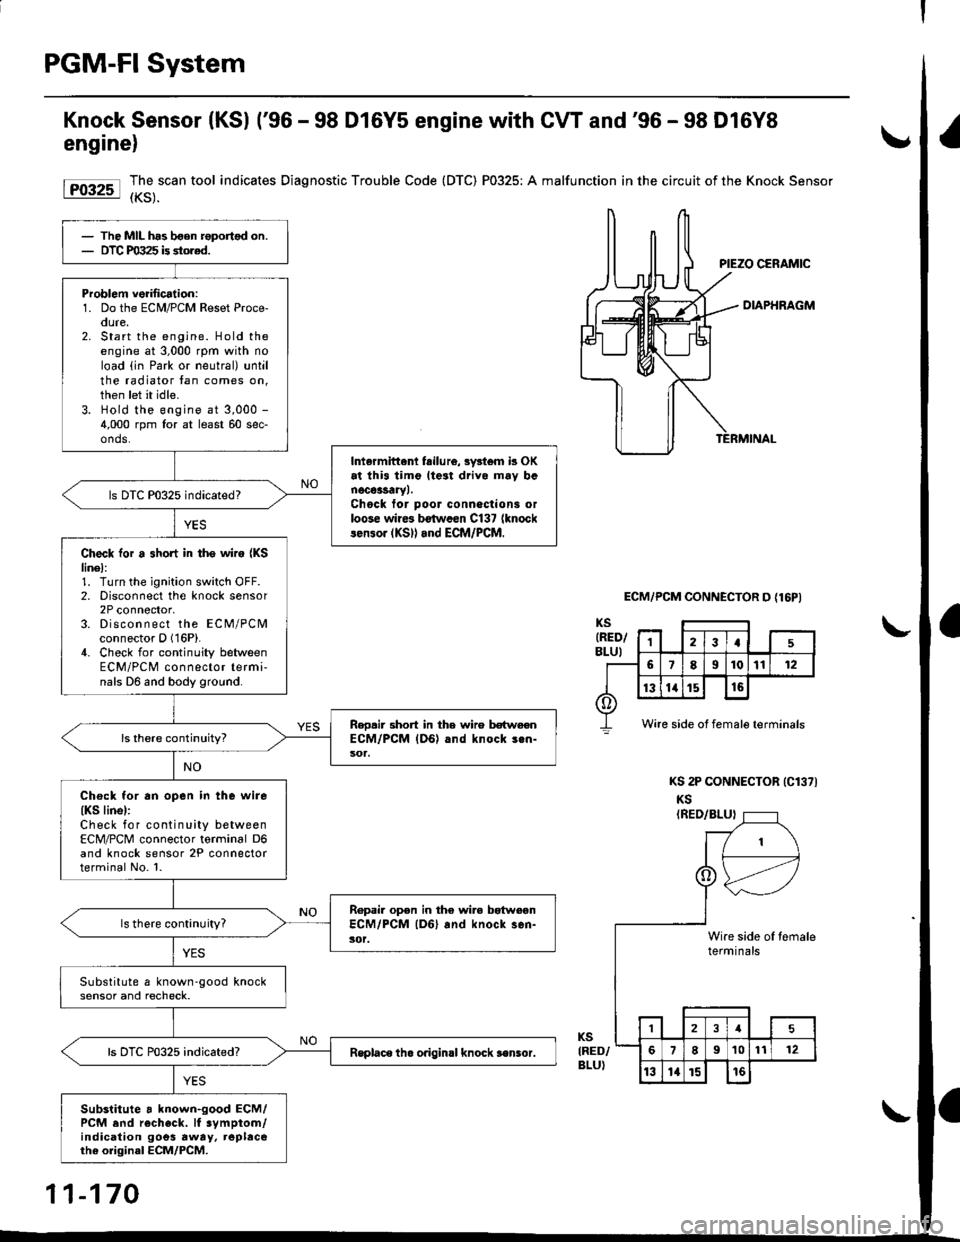 HONDA CIVIC 1996 6.G Service Manual PGM-FI System
Knock Sensor (KSl (96 - 98 D16Y5 engine with CW and96 - 98 D16Y8
engine)
Forr-l I,3,."""" 
tool indicates Diagnostic Trouble Code (DTC) P0325: A malfunction in the circuit of the Knock